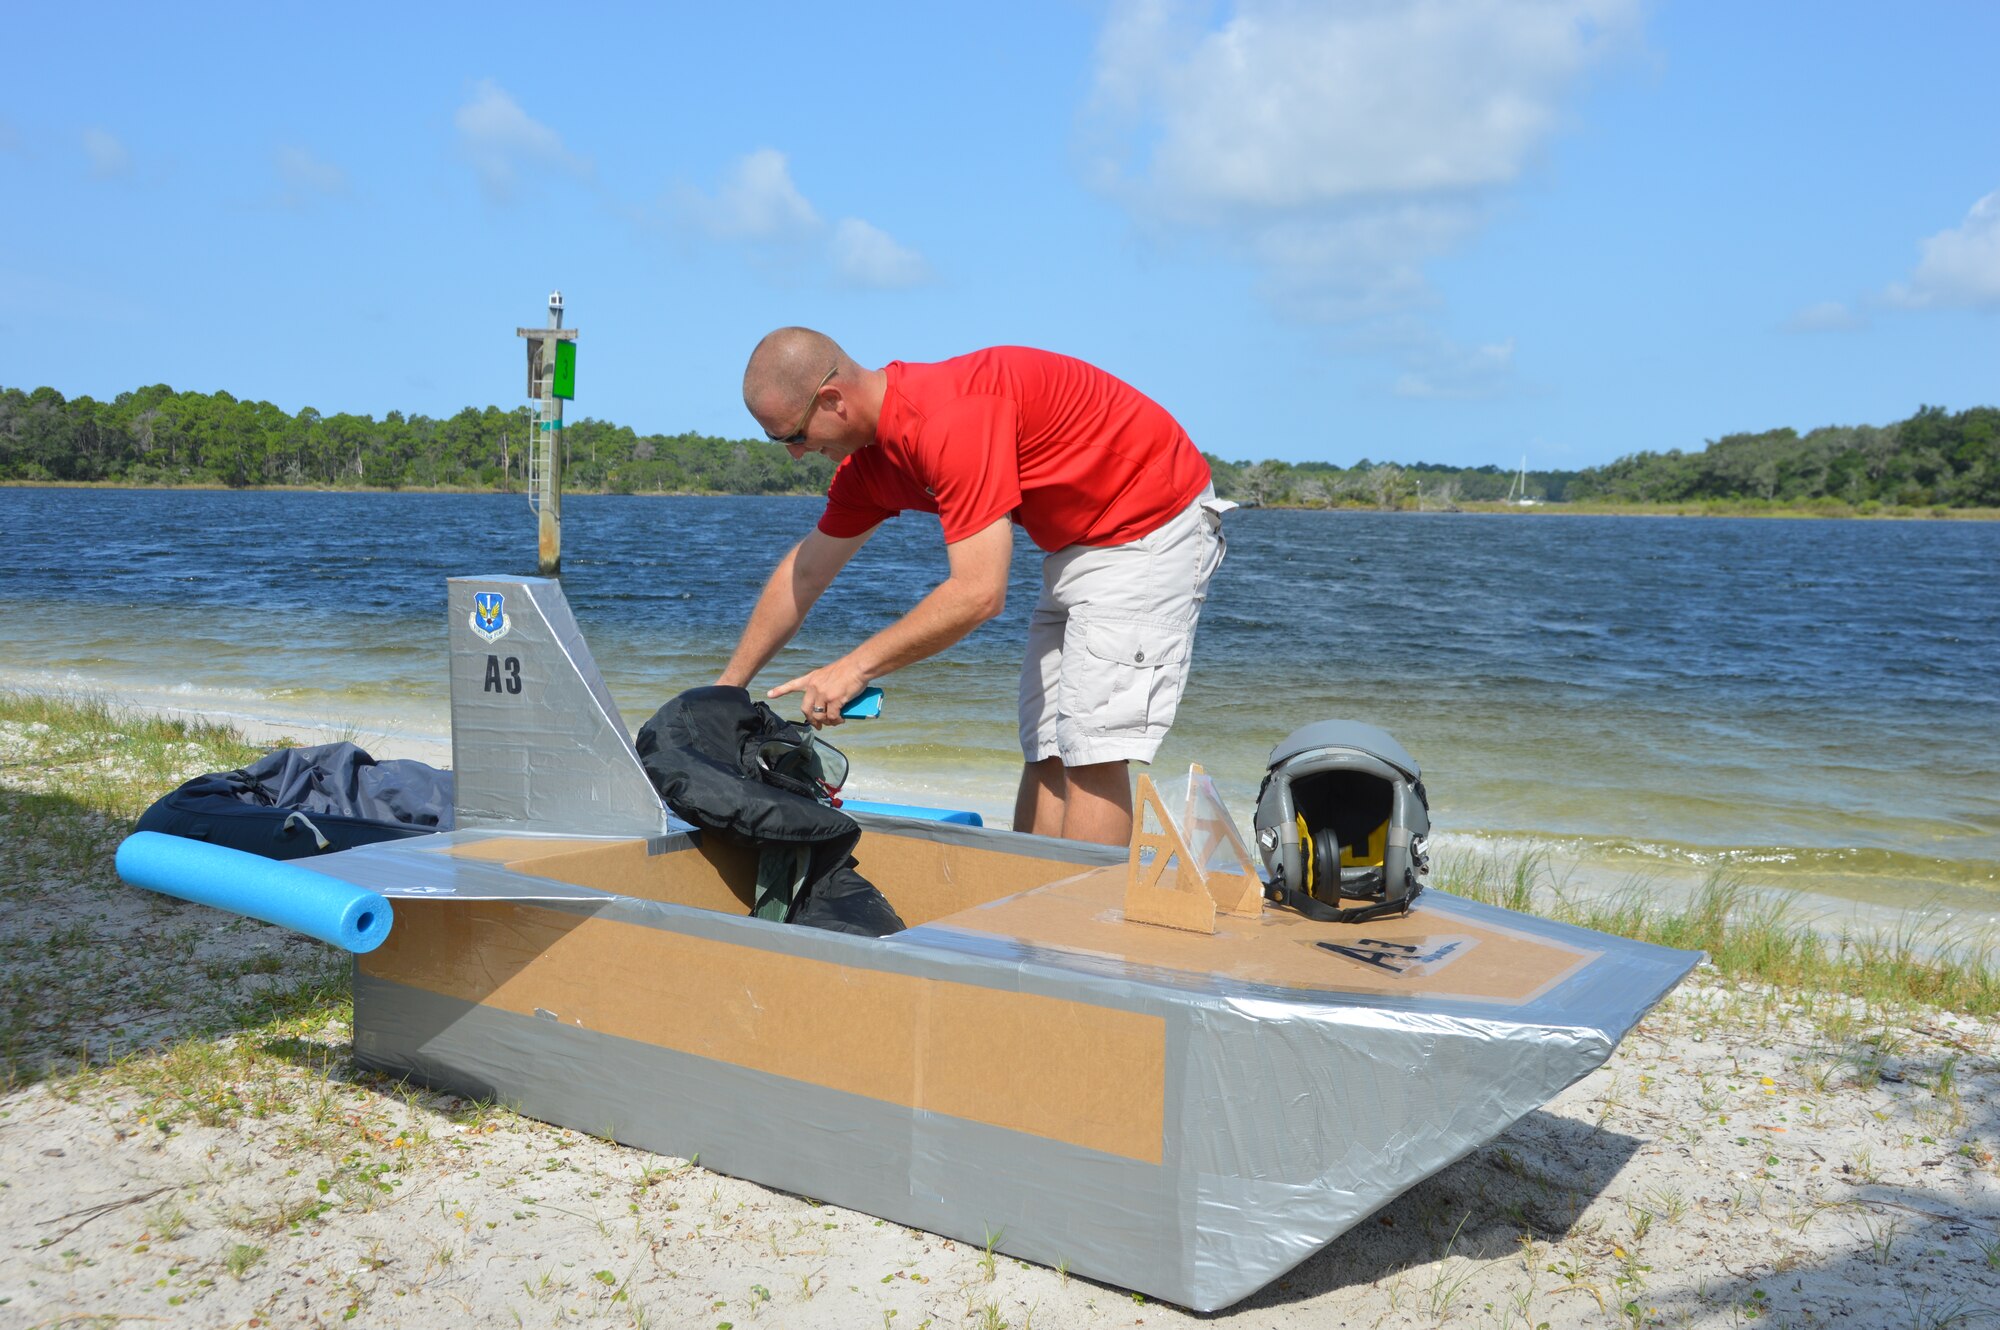 Master Sgt. Joseph Cooper, 1st Air Force (Air Forces Northern) Air, Space & Information Operations Directorate, adjusts some equipment in the A3 entry prior to the cardboard boat race at Bonita Bay Aug. 7 during the 1st AF (AFNORTH) “Family Day 2015.” The race kicked off the day which focused on taking care of the organization’s families and featured a variety of activities that included food and sport competitions, a waterslide and plenty to eat and drink. (Air Force Photo Released/Mary McHale)